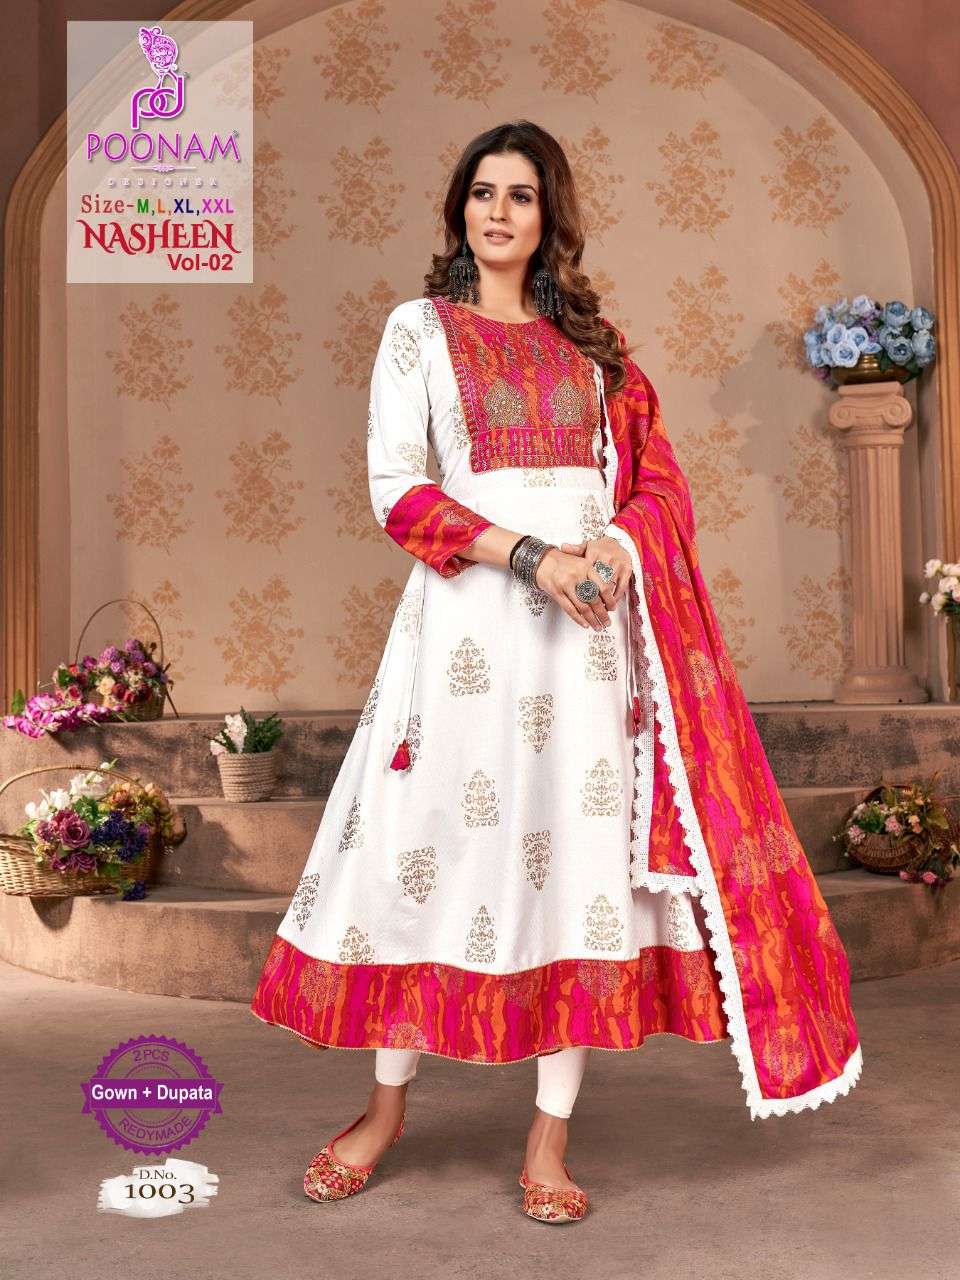 poonam designer nasheen vol 2 1001-1004 series full printed gown with dupatta catalogue new collection 